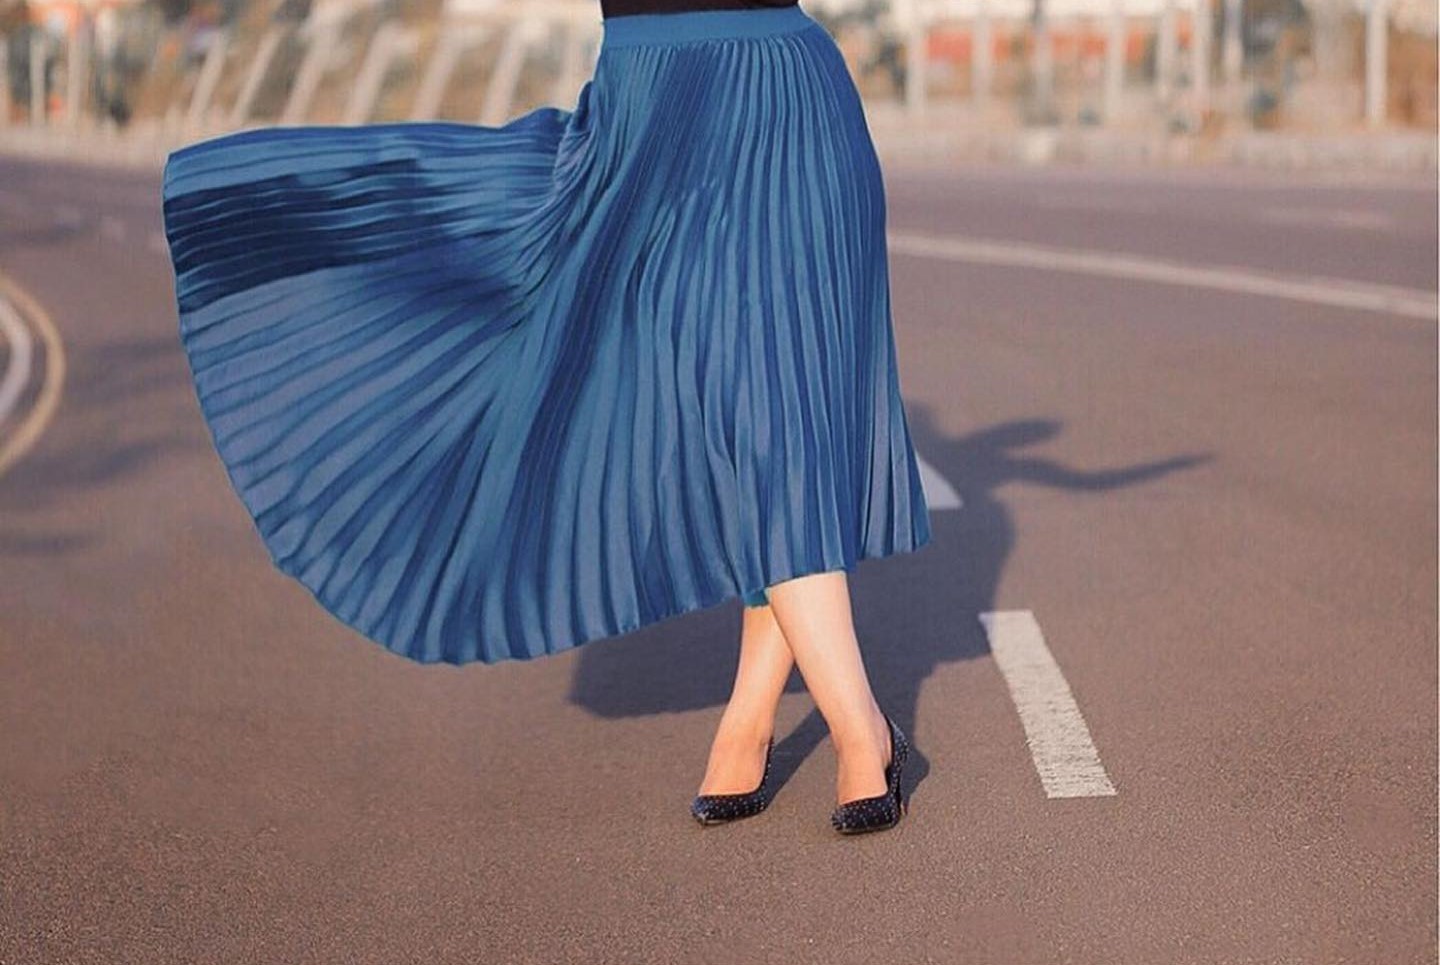 A woman stands on the road, wearing a blue pleated skirt